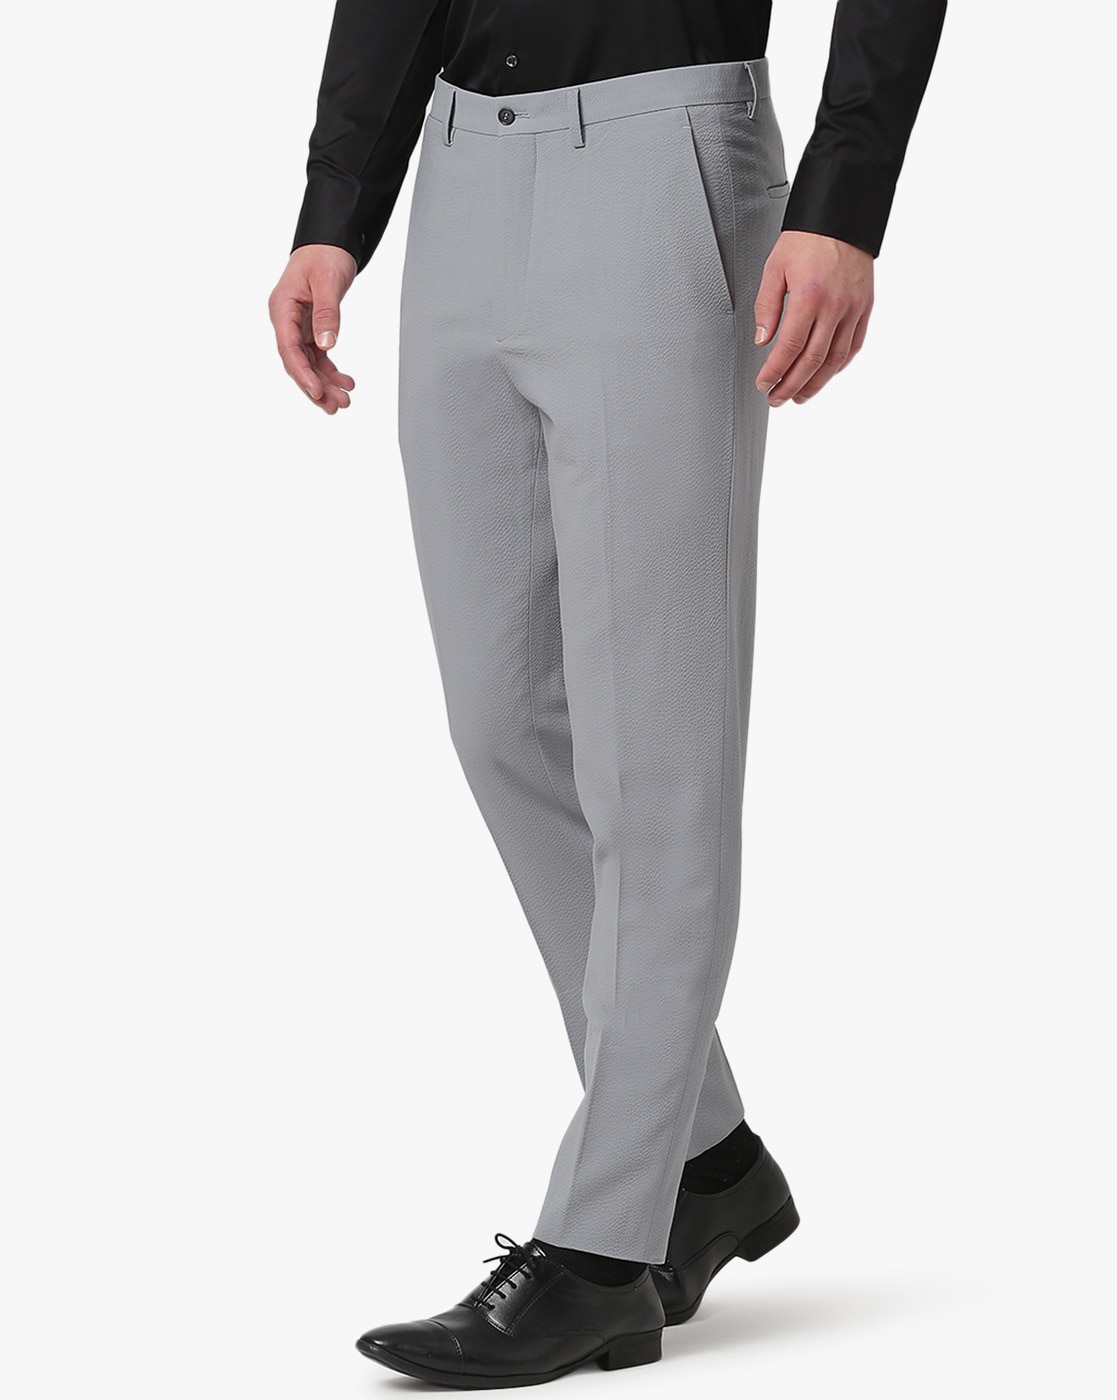 Stainless Steel Slim Fit Men Multicolor Plain Armani Formal Pant 28 To 36  Available Waist Size at Best Price in Pune  Jm Garments